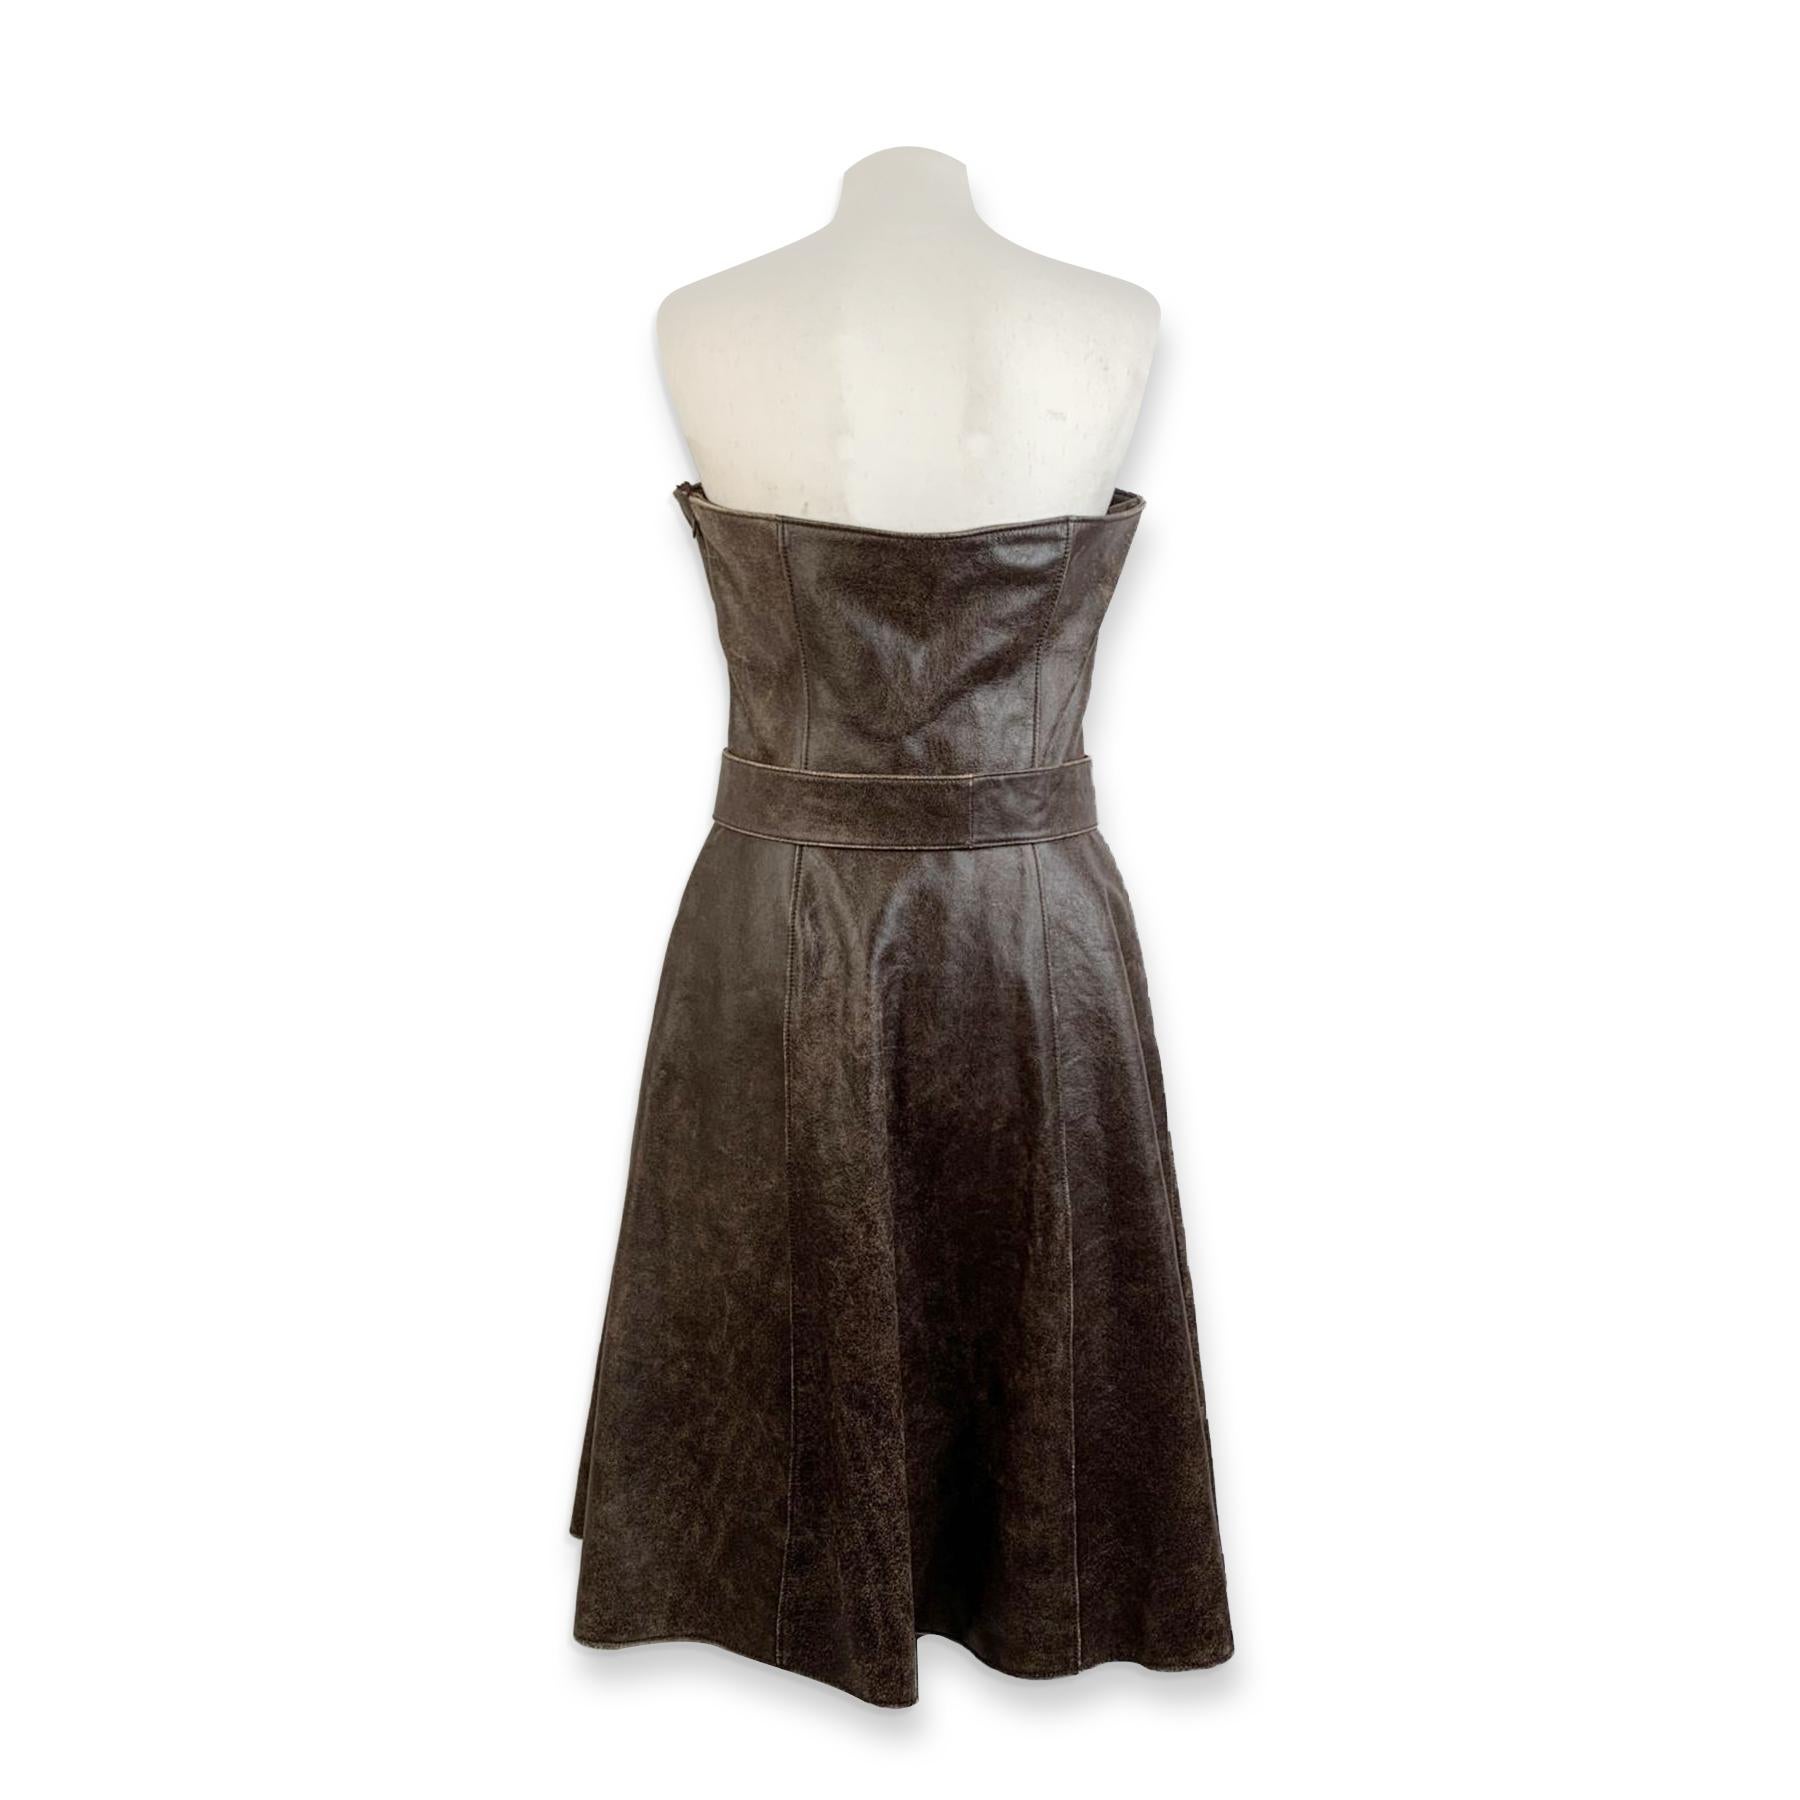 Miu Miu bandeau bustier dress in brown distressed leather. it features a bandeau neck, side-zip fastening and belted waistline. Knee lenght. Lined. Size: 44 (it should correspond to a MEDIUM size).



Details

MATERIAL: Leather

COLOR: Brown

MODEL: